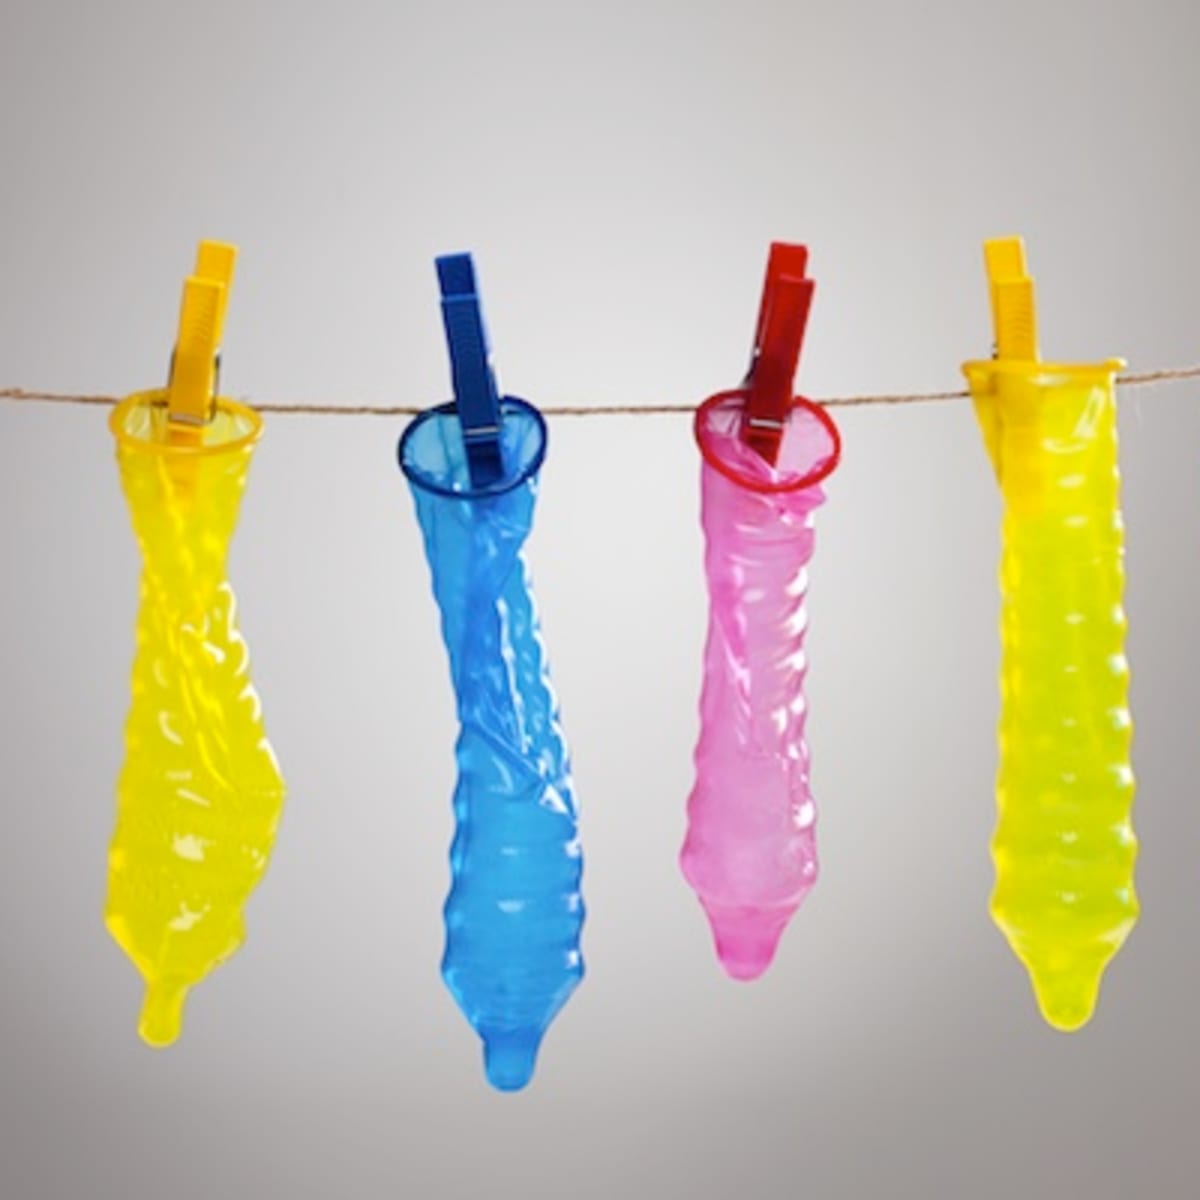 Why Dont We Use Condoms for Oral Sex? pic picture